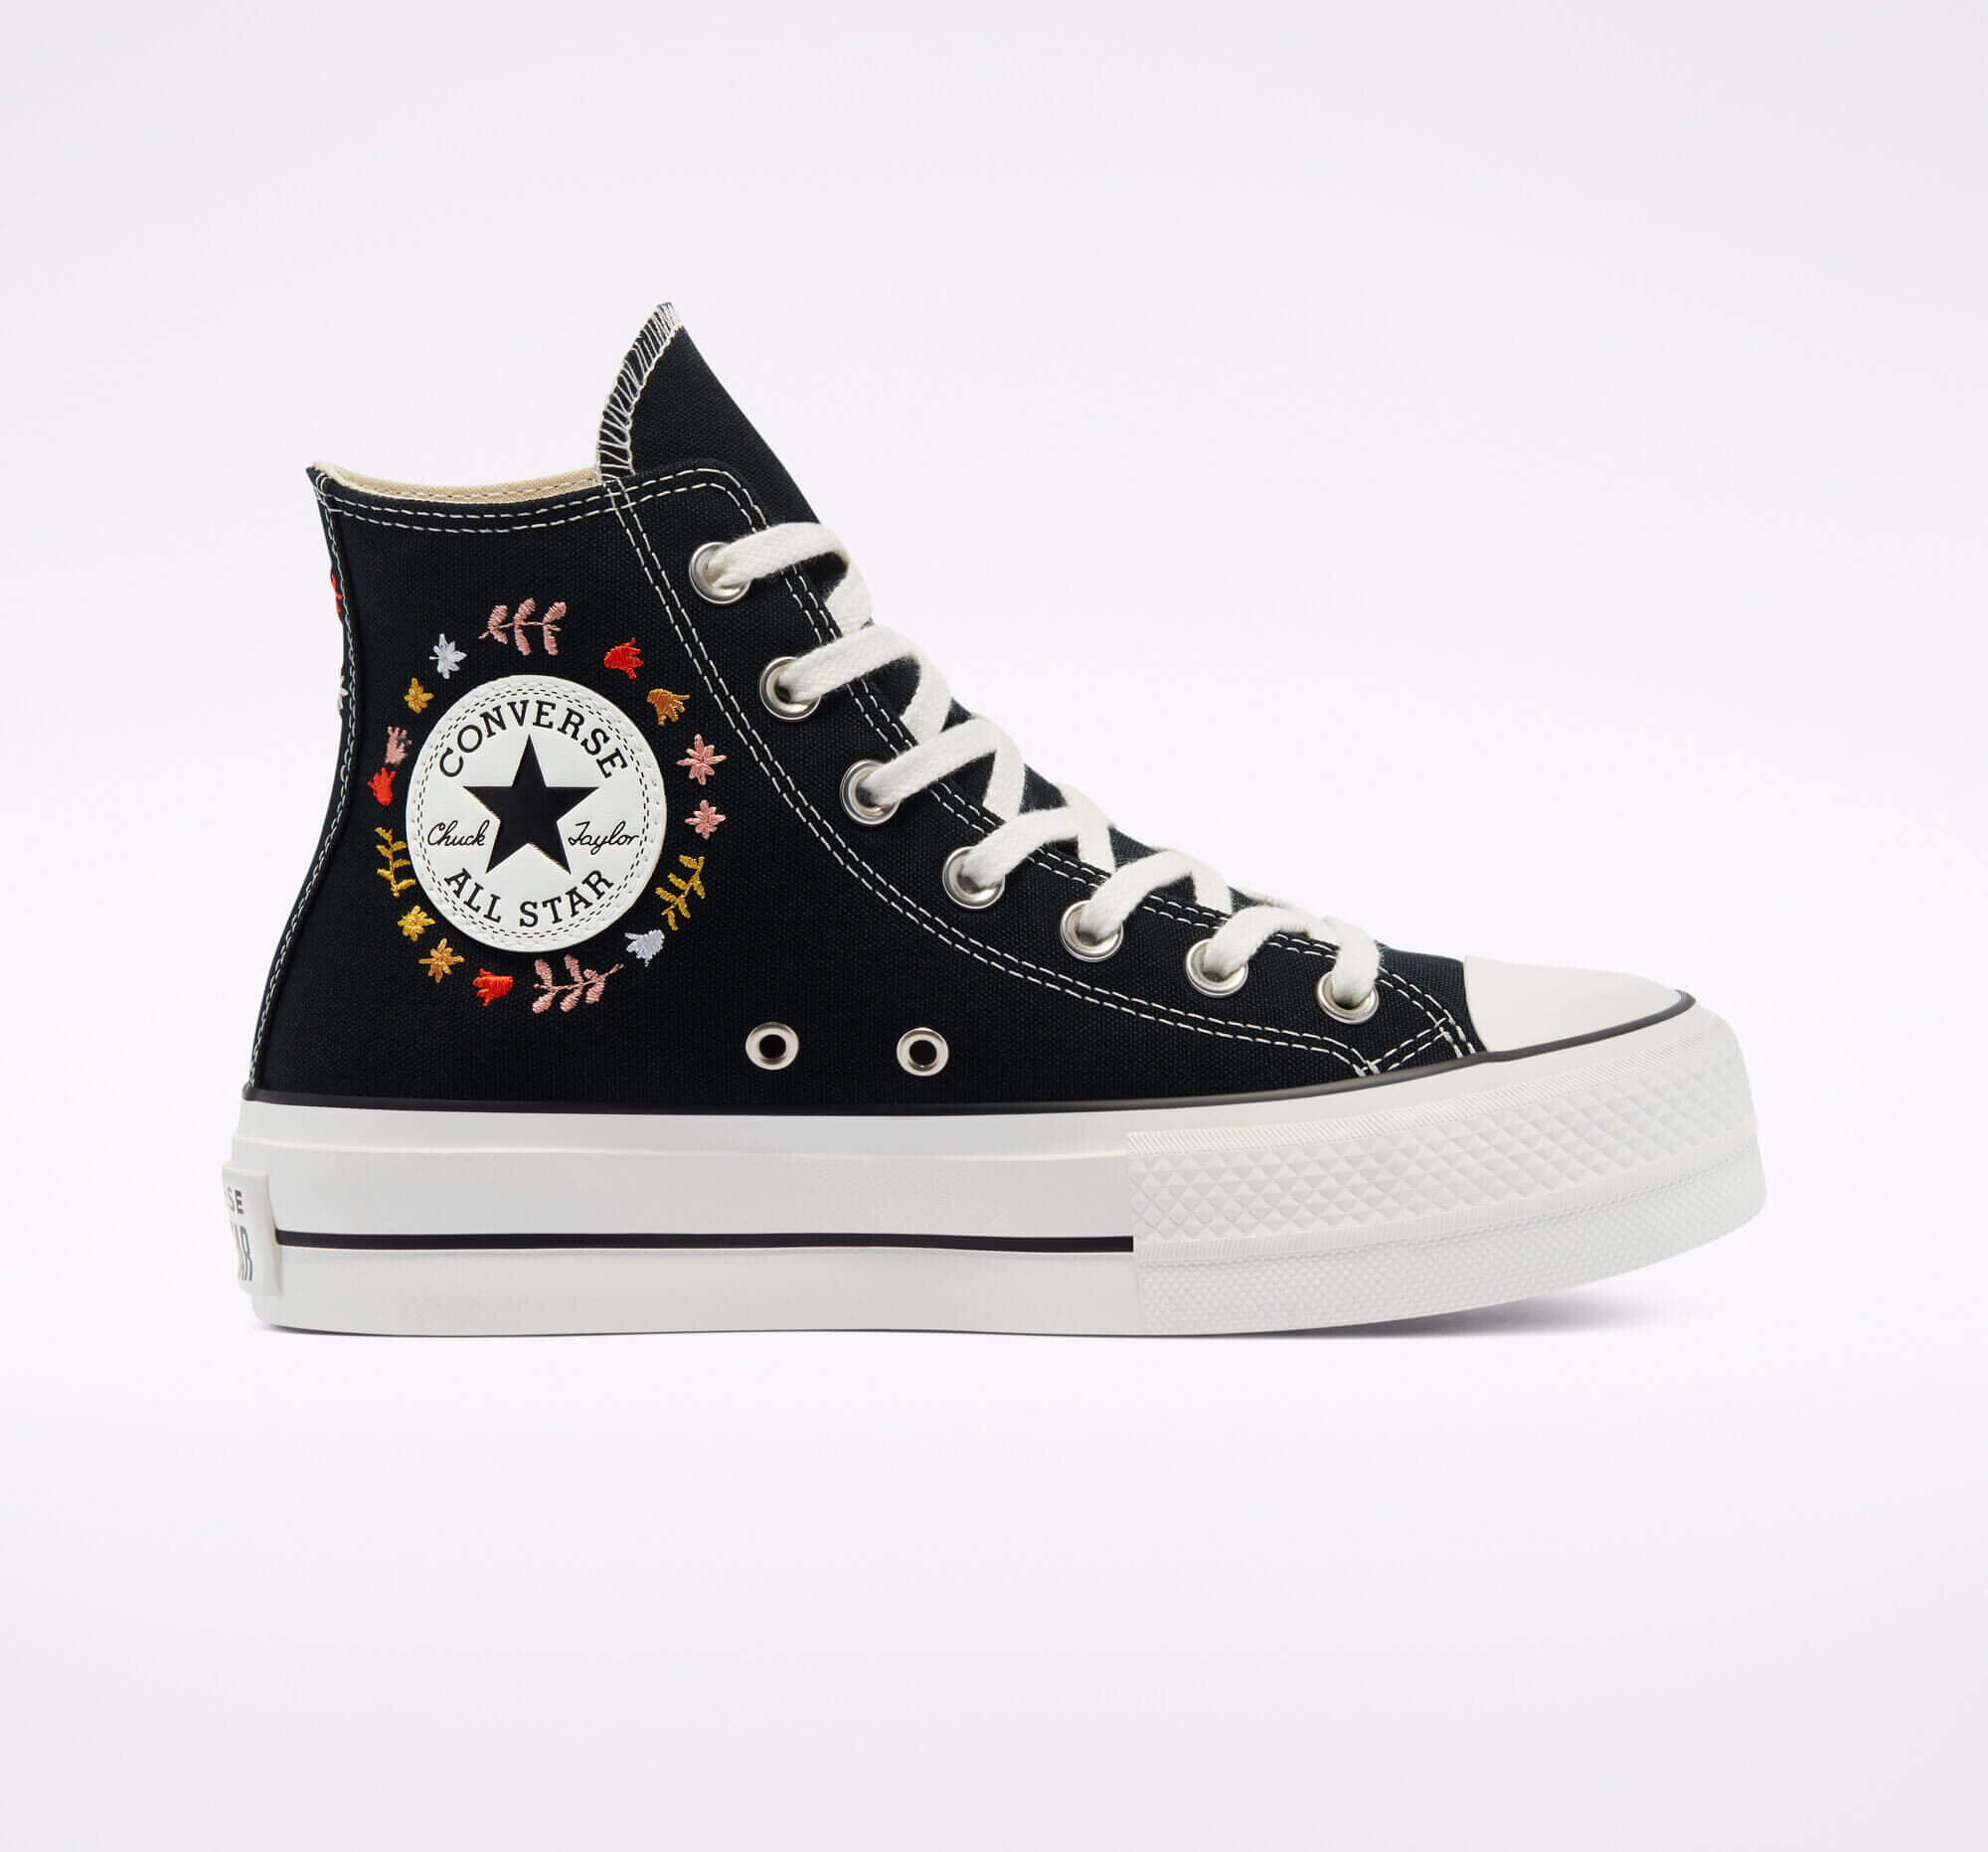 CNK-Converse-My-Story-Collection-Its-Okay-To-Wander-Platform-High-1.jpg